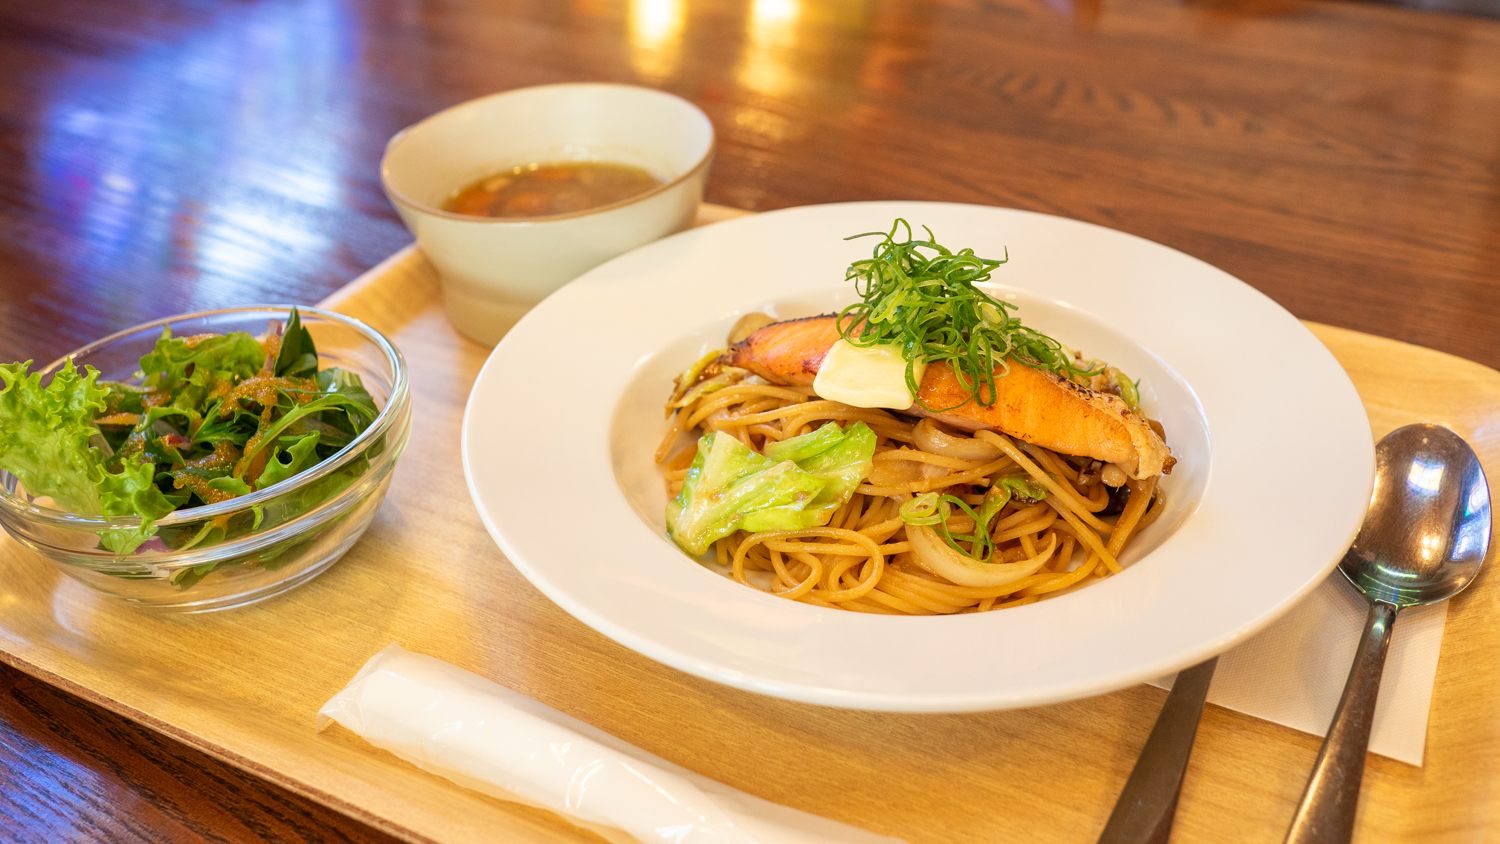 Pasta in the style of "Chanchan yaki" that is the traditional and local dish of salmon in Hokkaido